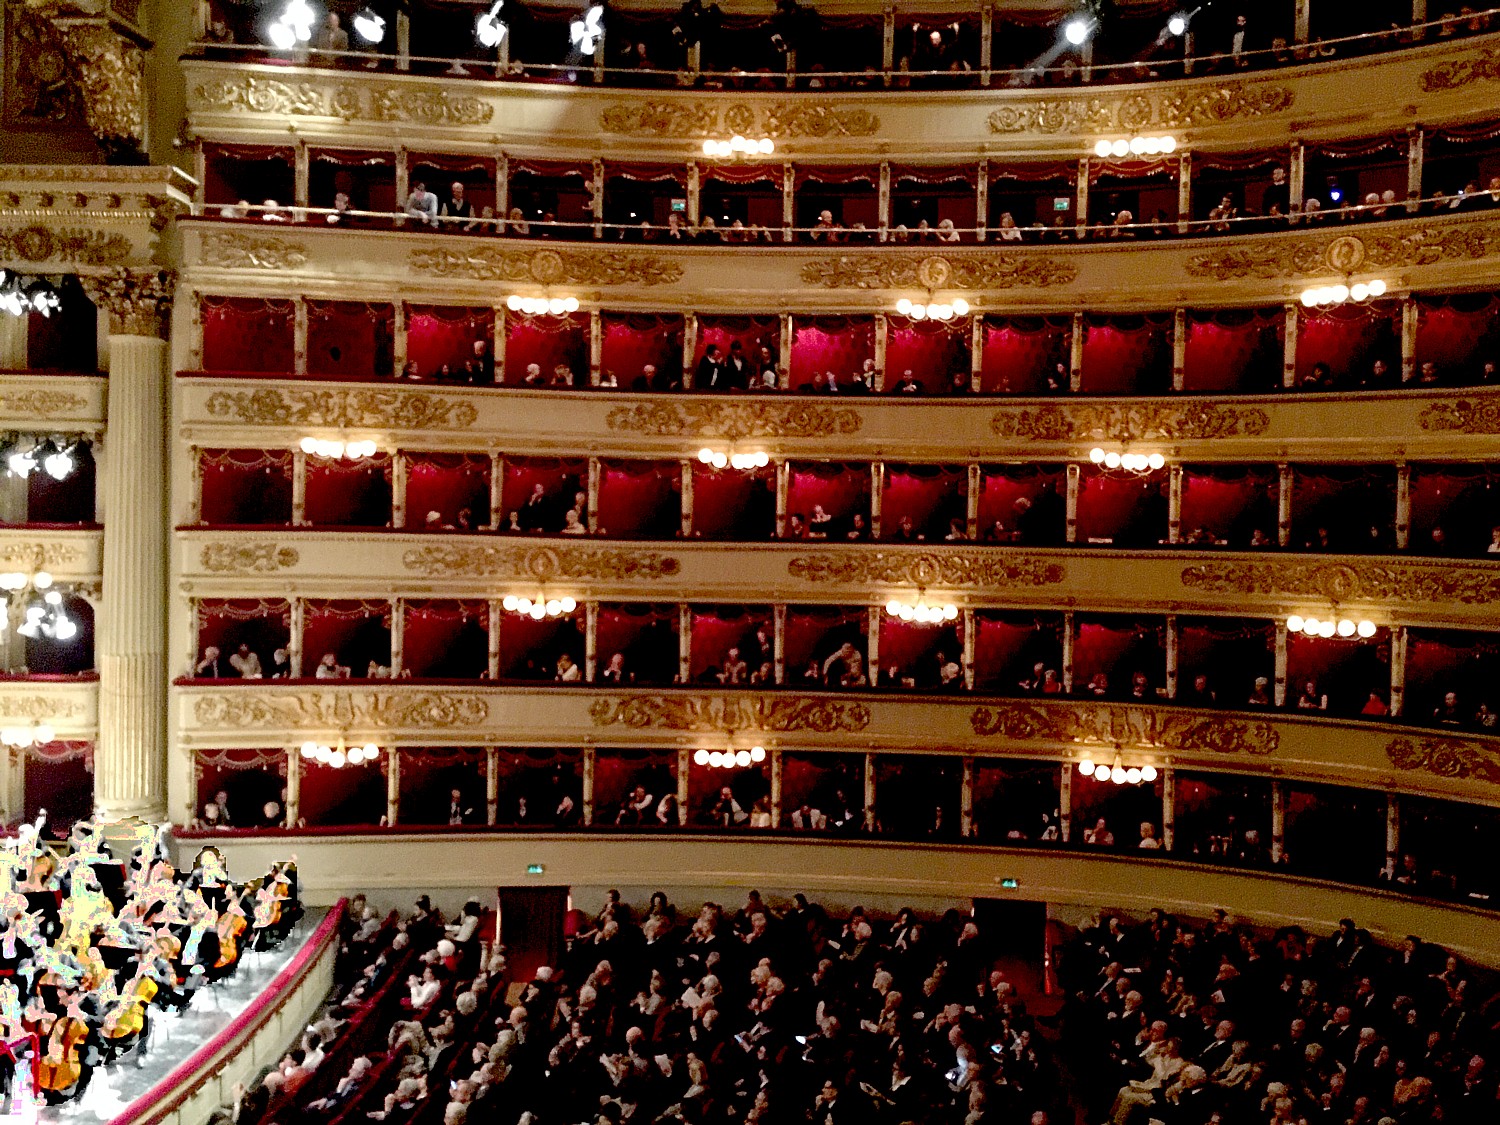 Seeing a performance at the famed La Scala theater in Milan, Italy, is a grand experience that transports you back to the Belle Epoque. Designed by Giuseppe Piermarini, the theater opened in 1778 (photo by Leiberman-Nemett)